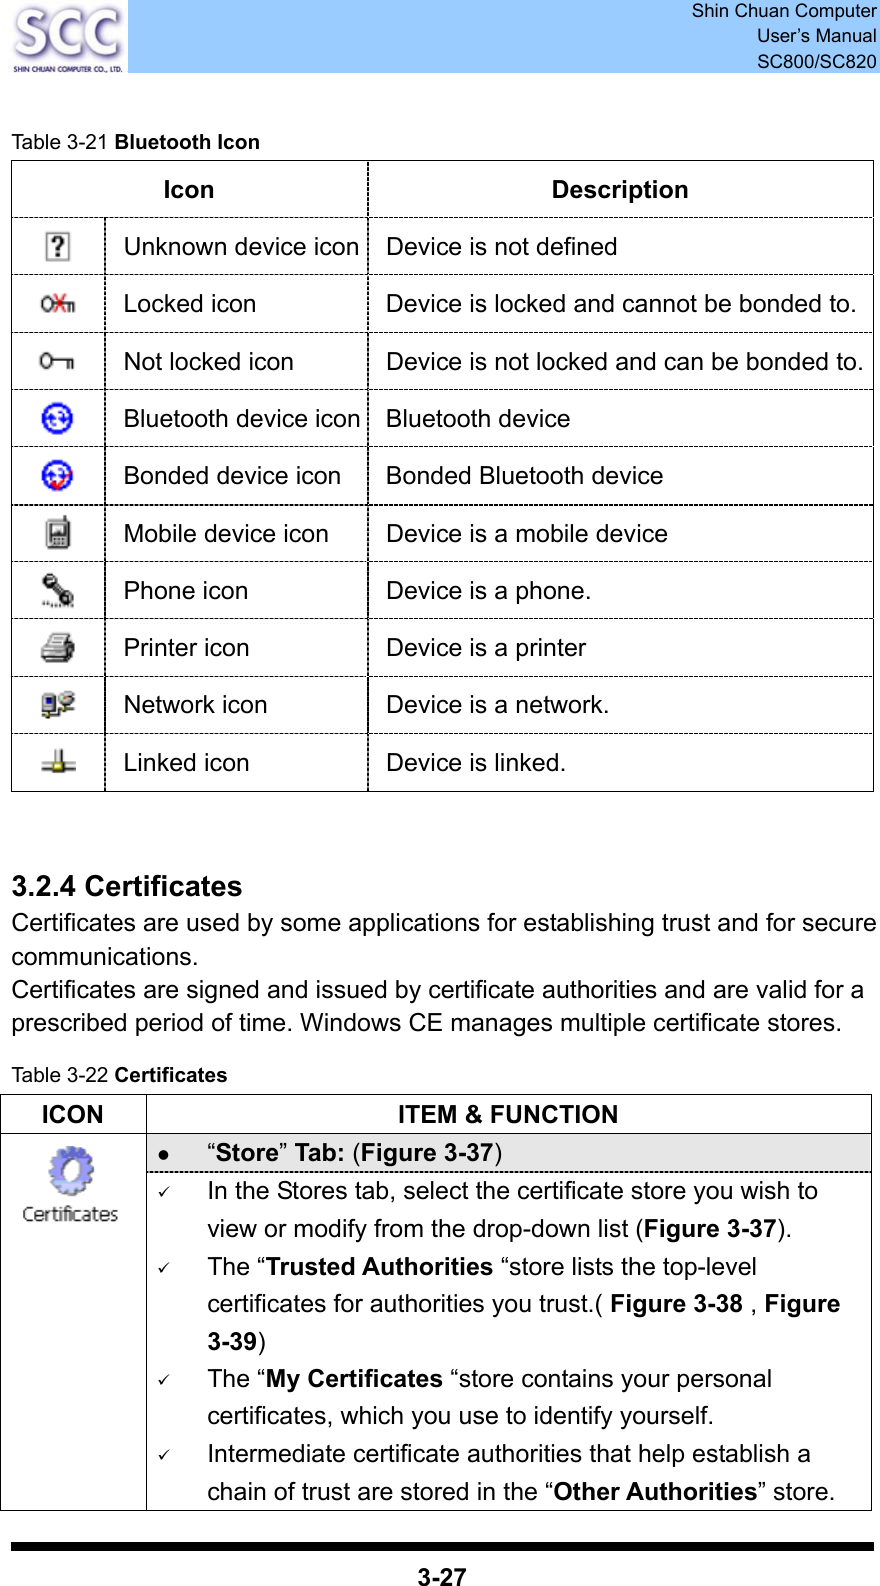  Shin Chuan Computer User’s Manual SC800/SC820  3-27  Table 3-21 Bluetooth Icon Icon Description  Unknown device icon Device is not defined  Locked icon  Device is locked and cannot be bonded to. Not locked icon  Device is not locked and can be bonded to. Bluetooth device icon Bluetooth device  Bonded device icon  Bonded Bluetooth device  Mobile device icon  Device is a mobile device  Phone icon  Device is a phone.  Printer icon  Device is a printer  Network icon  Device is a network.  Linked icon  Device is linked.   3.2.4 Certificates Certificates are used by some applications for establishing trust and for secure communications. Certificates are signed and issued by certificate authorities and are valid for a prescribed period of time. Windows CE manages multiple certificate stores.  Table 3-22 Certificates ICON  ITEM &amp; FUNCTION z “Store” Tab: (Figure 3-37)         9 In the Stores tab, select the certificate store you wish to view or modify from the drop-down list (Figure 3-37).   9 The “Trusted Authorities “store lists the top-level certificates for authorities you trust.( Figure 3-38 , Figure 3-39)   9 The “My Certificates “store contains your personal certificates, which you use to identify yourself.   9 Intermediate certificate authorities that help establish a chain of trust are stored in the “Other Authorities” store. 